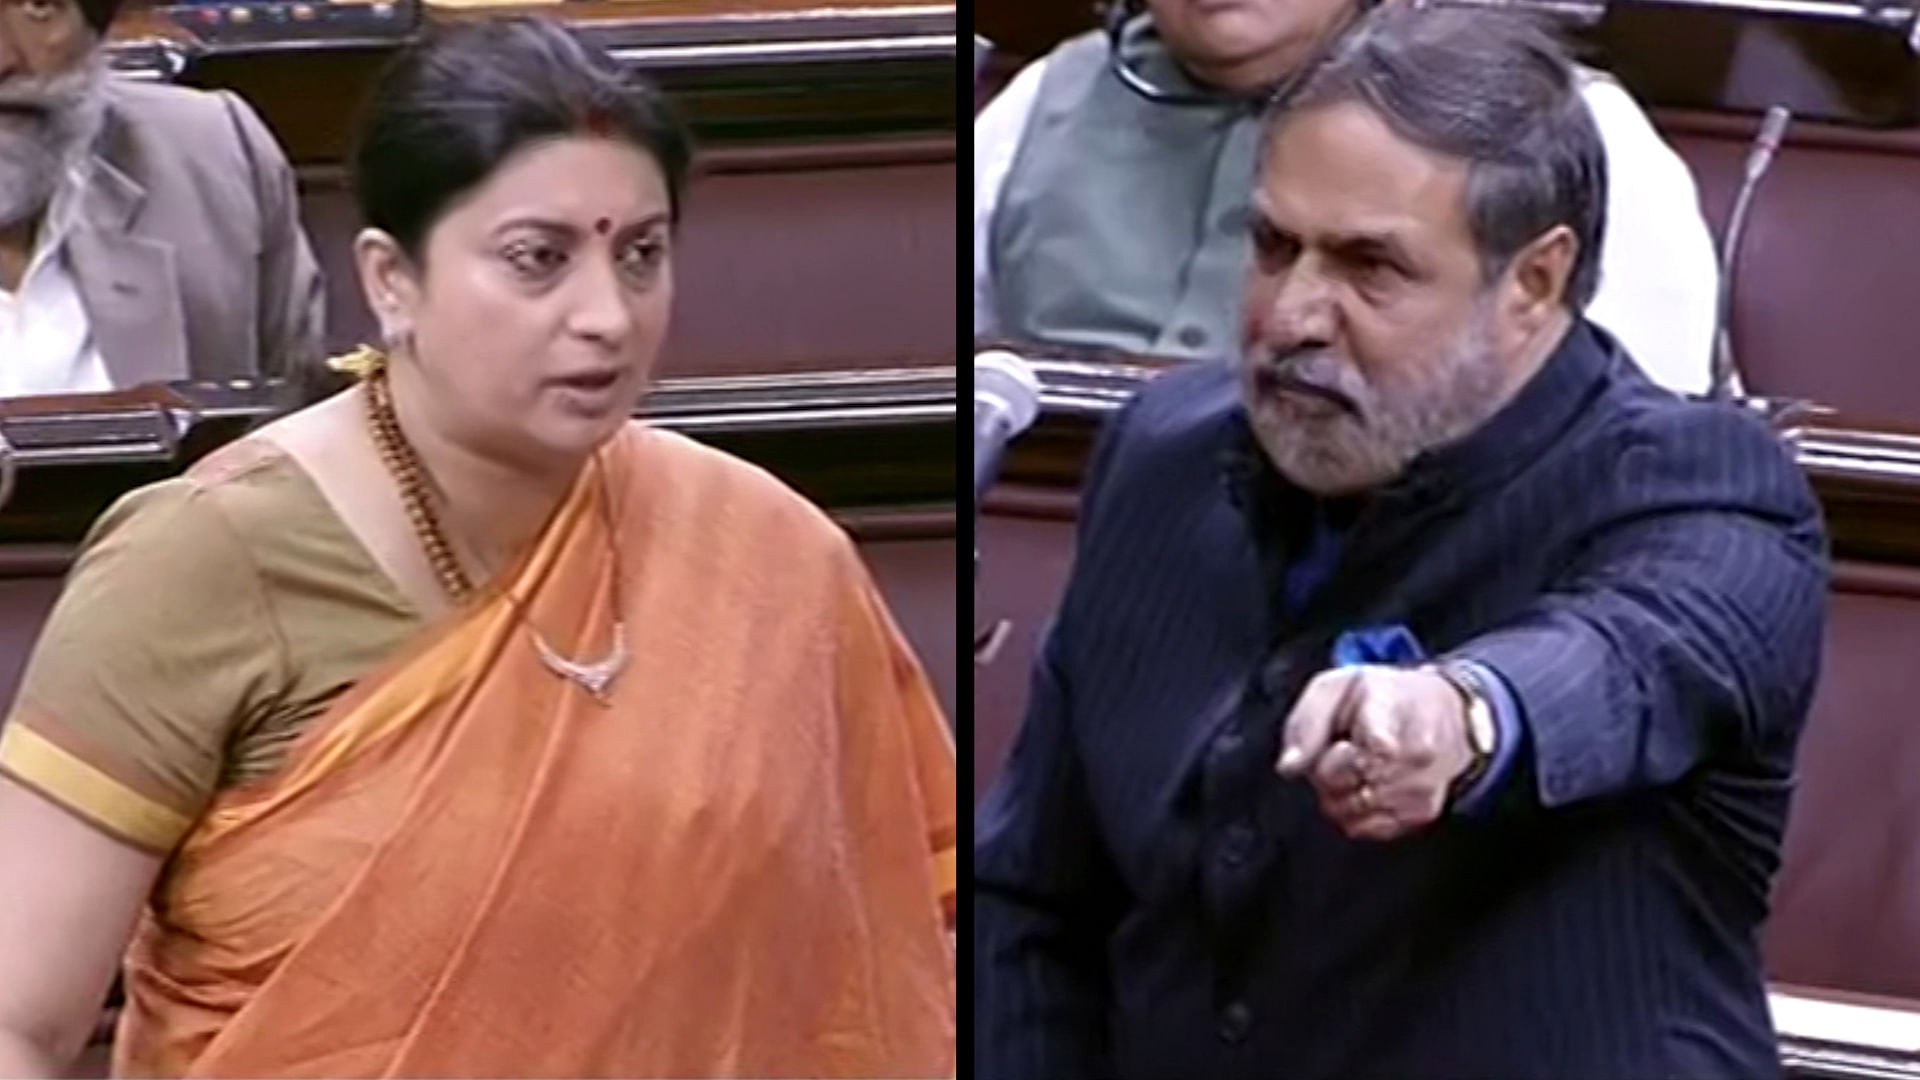 Opposition parties today sought an apology from HRD minister Smriti Irani (left) for reading out in Rajya Sabha “objectionable” comments made outside against Goddess Durga. (Photo: RSTV screengrabs, altered by <b>The Quint</b>)